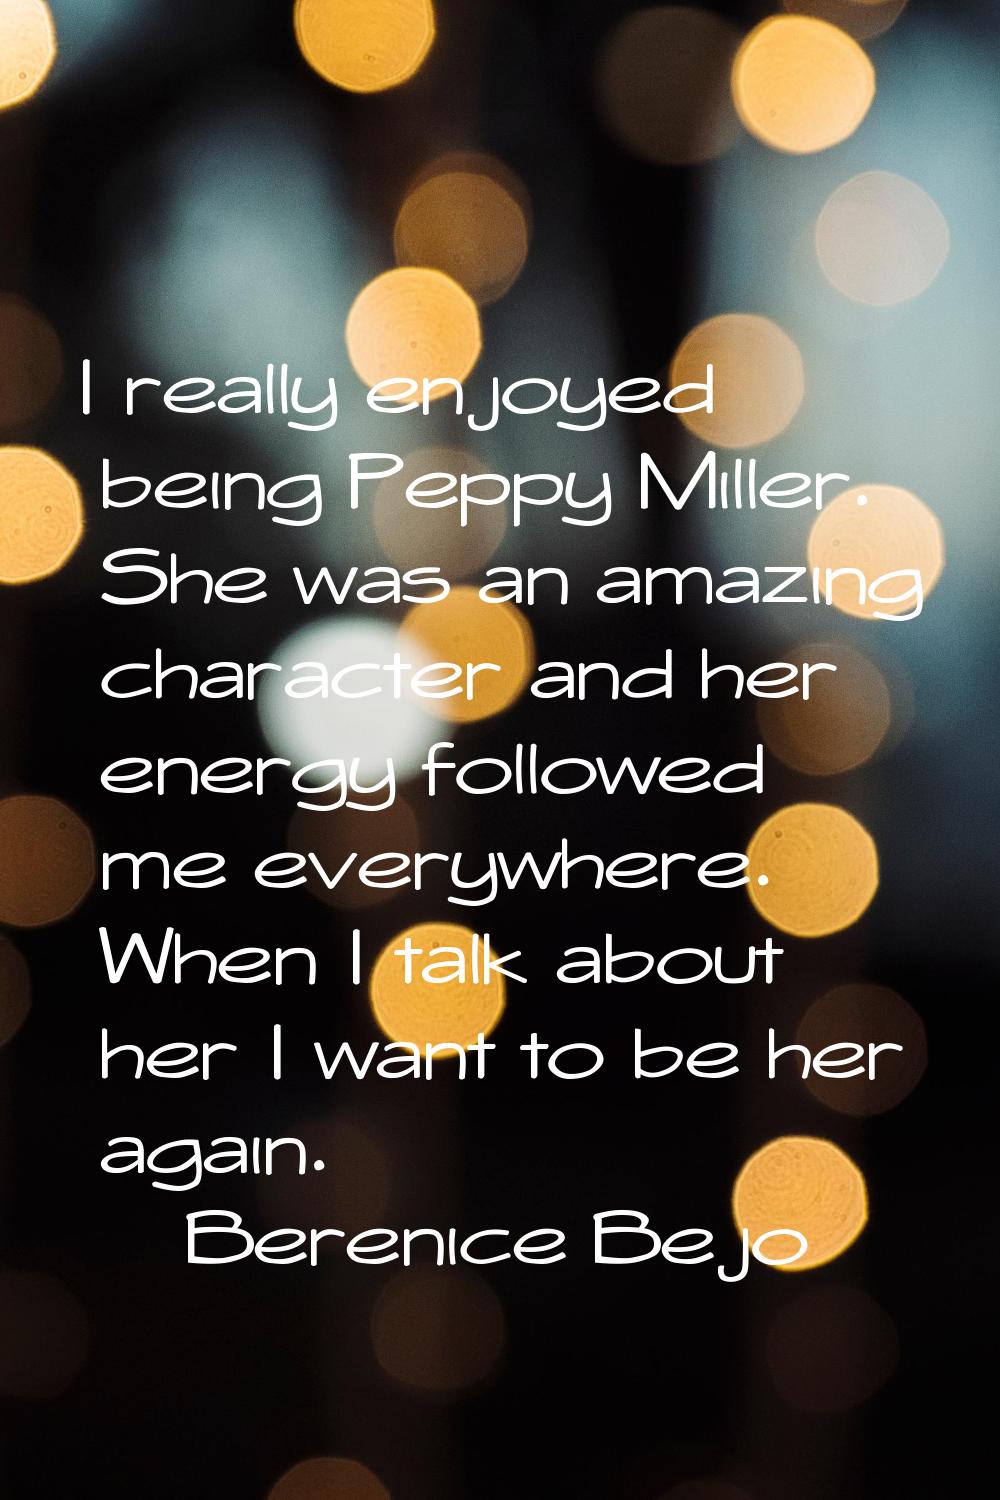 I really enjoyed being Peppy Miller. She was an amazing character and her energy followed me everyw